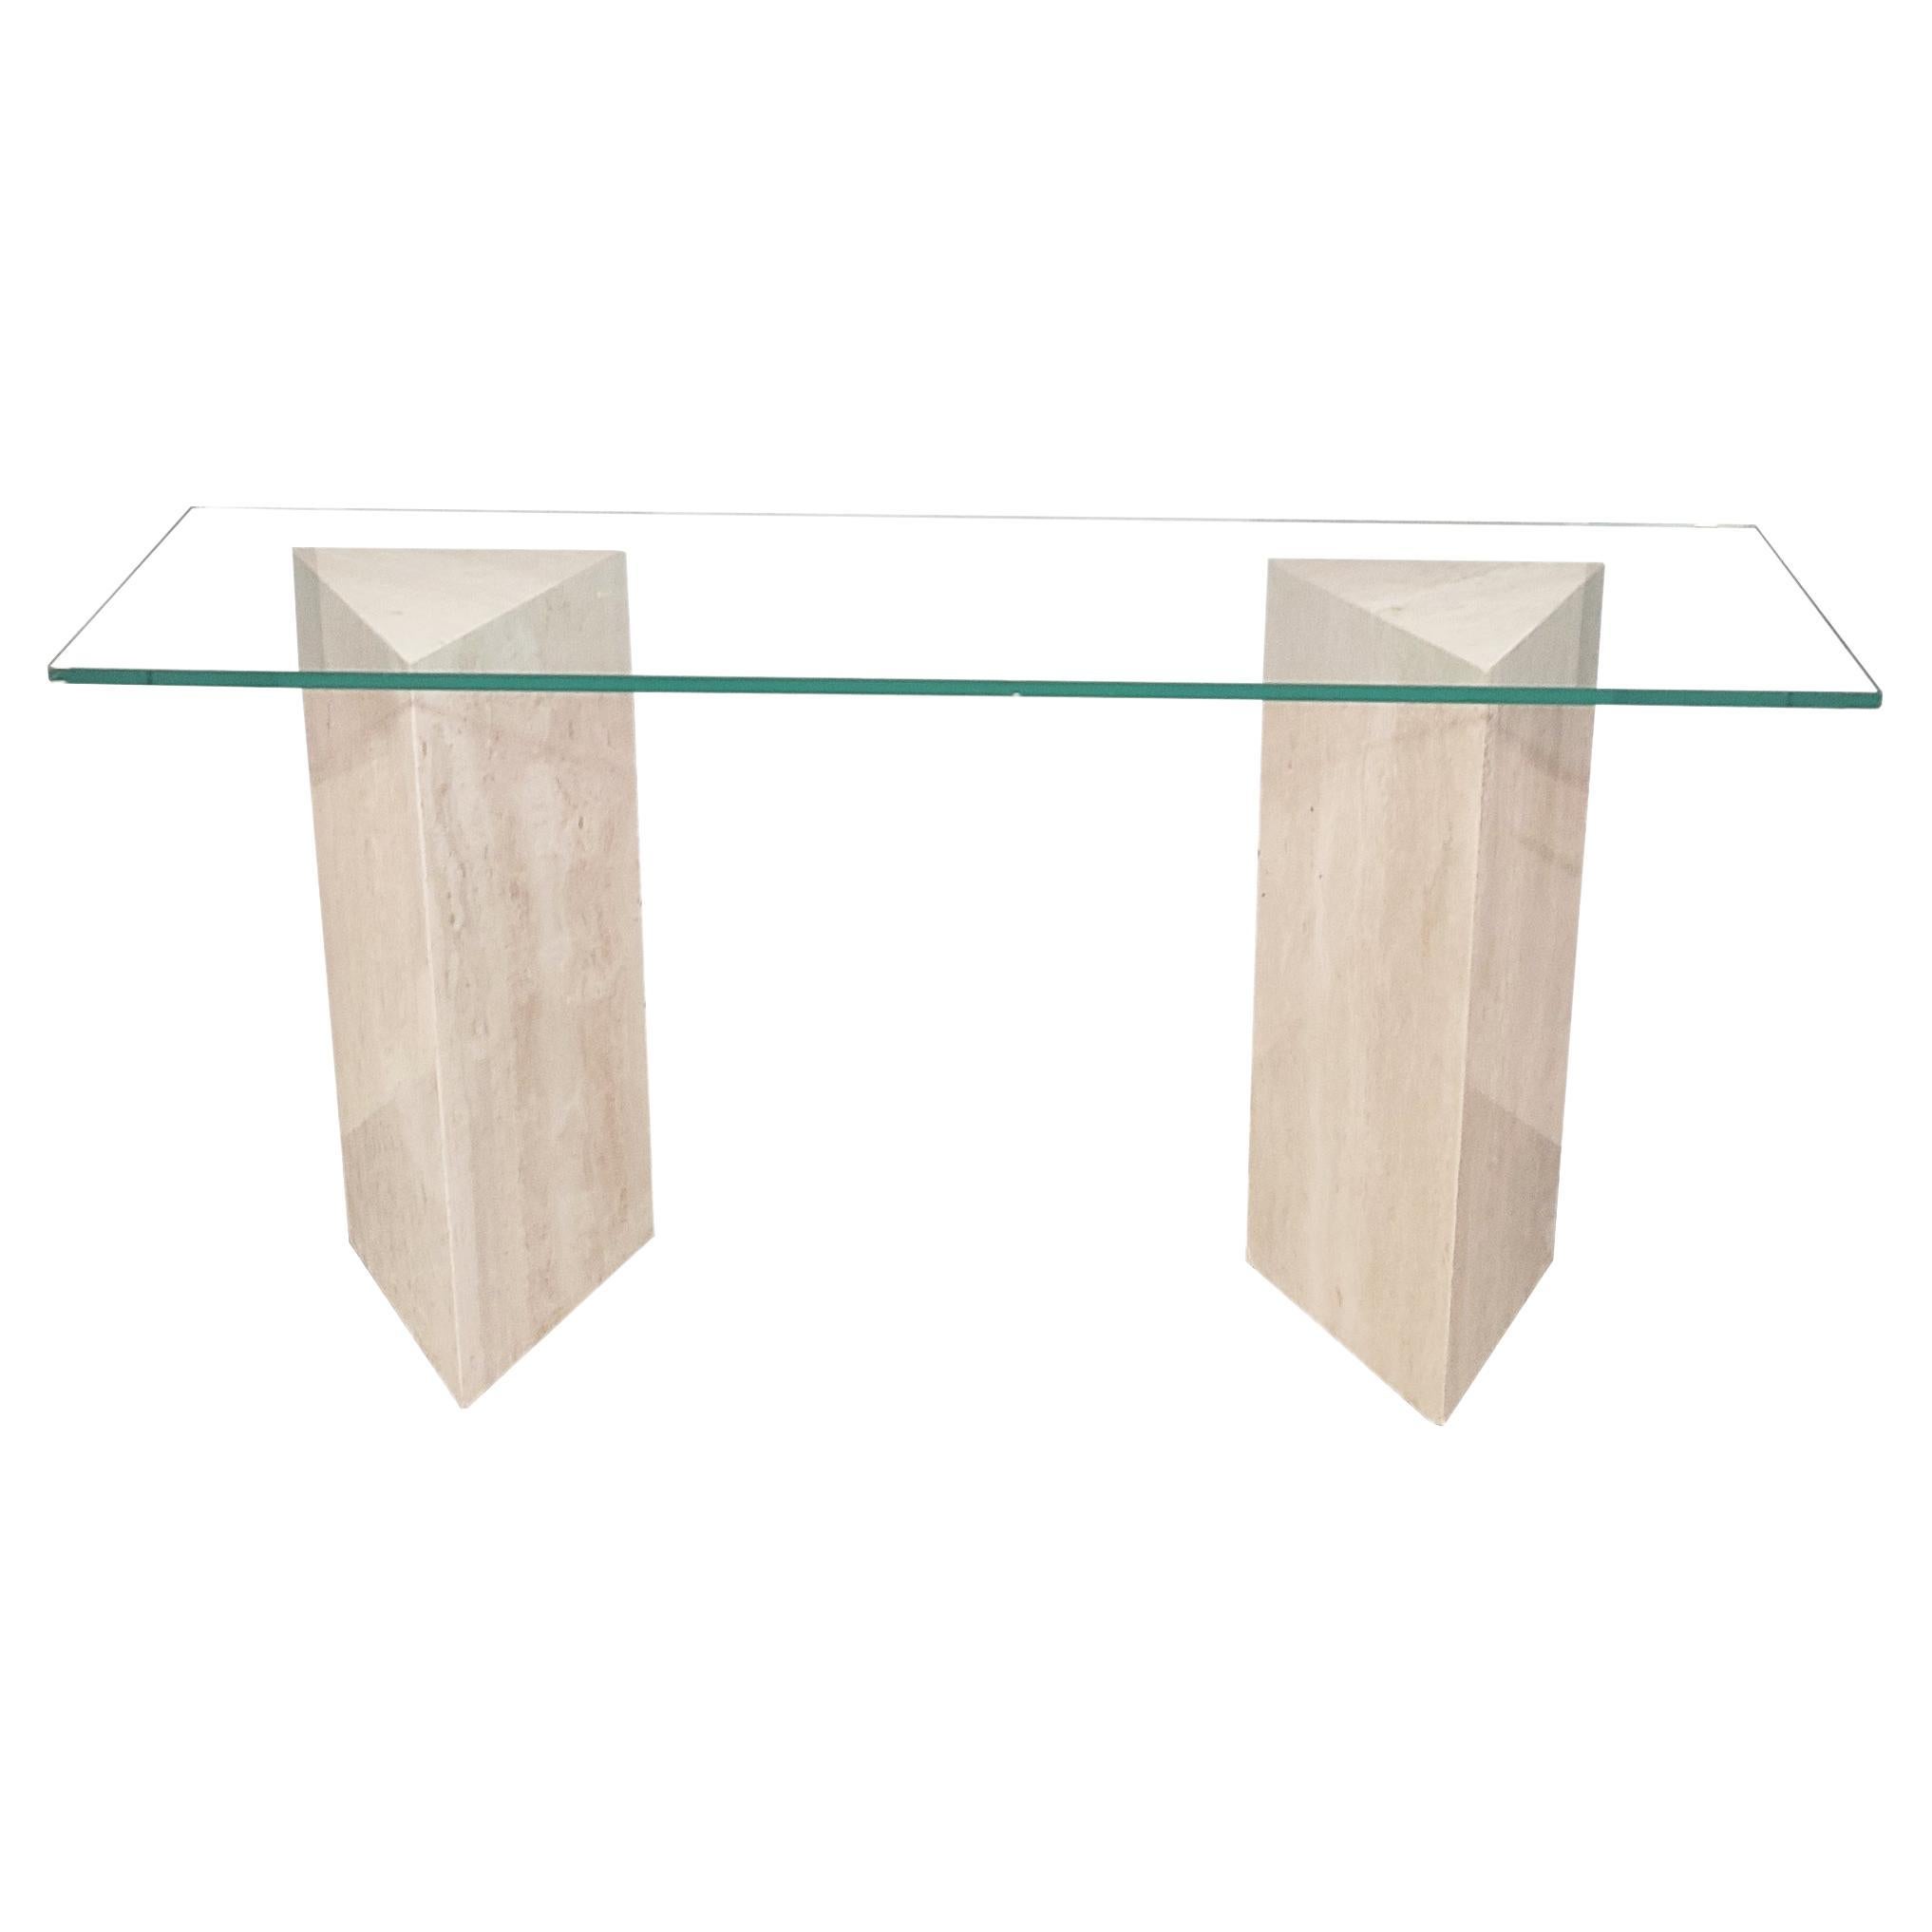 Tria Console Table Travertine Marble MidCentury '99 Modern Design Spain In Stock For Sale